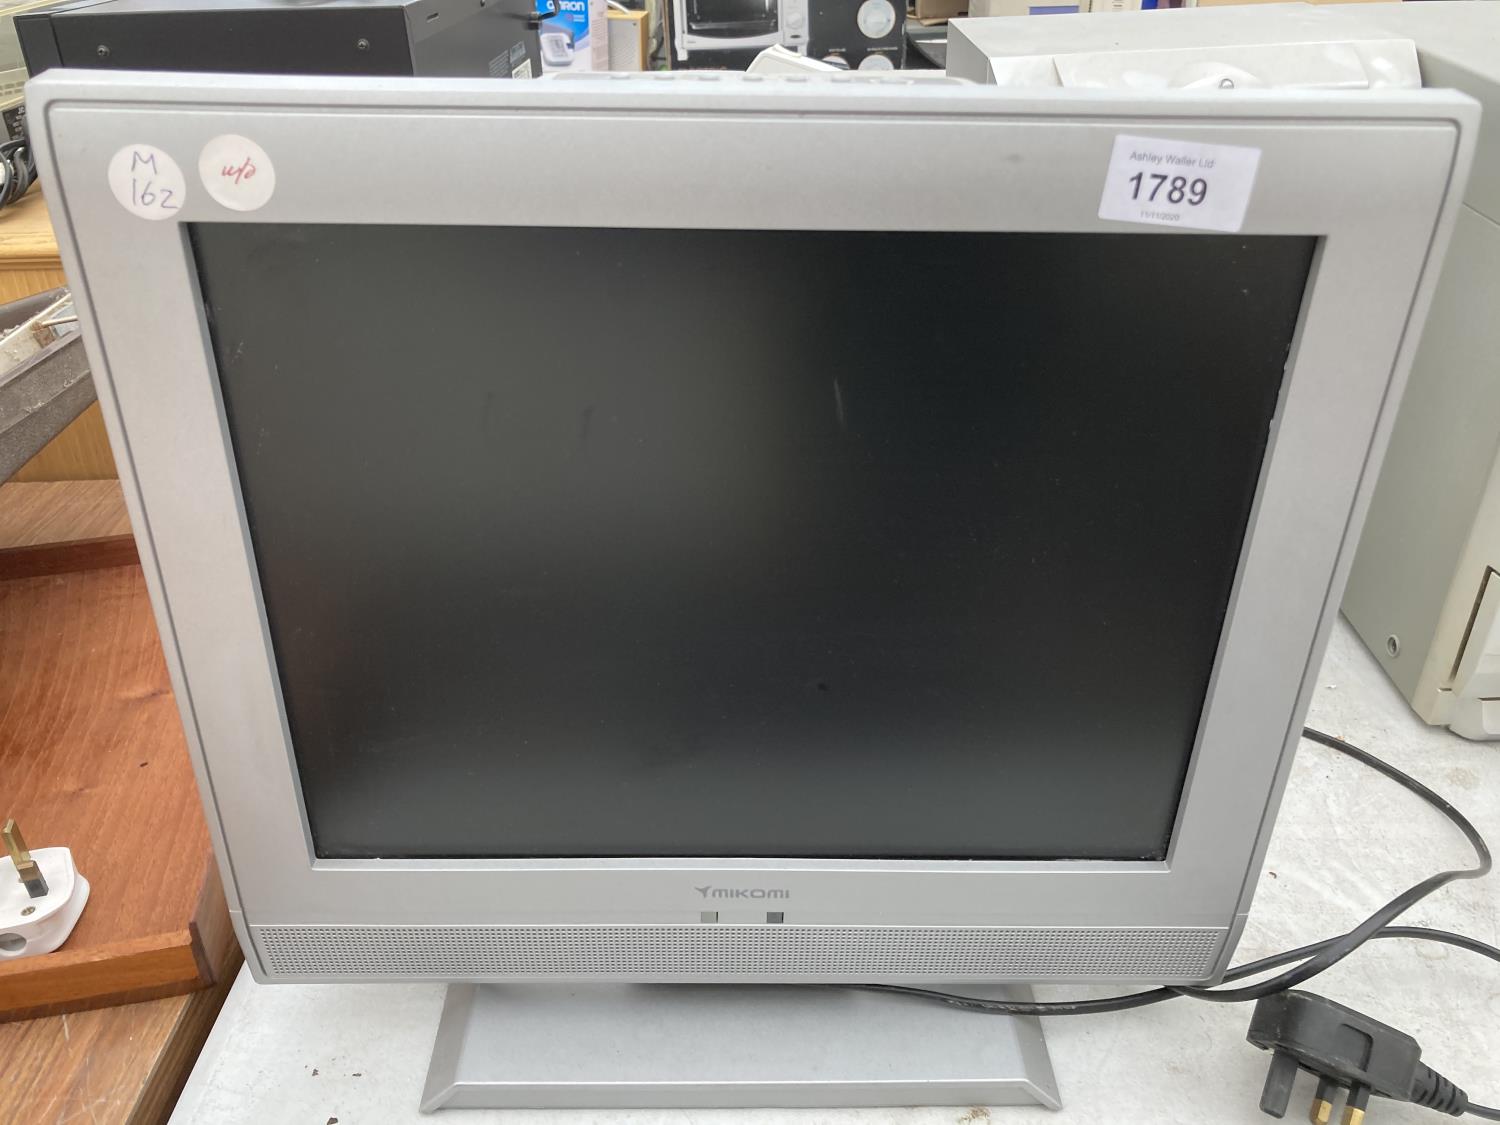 A 14" MIKOMI TELEVISION BELIEVED IN WORKING ORDER BUT NO WARRANTY